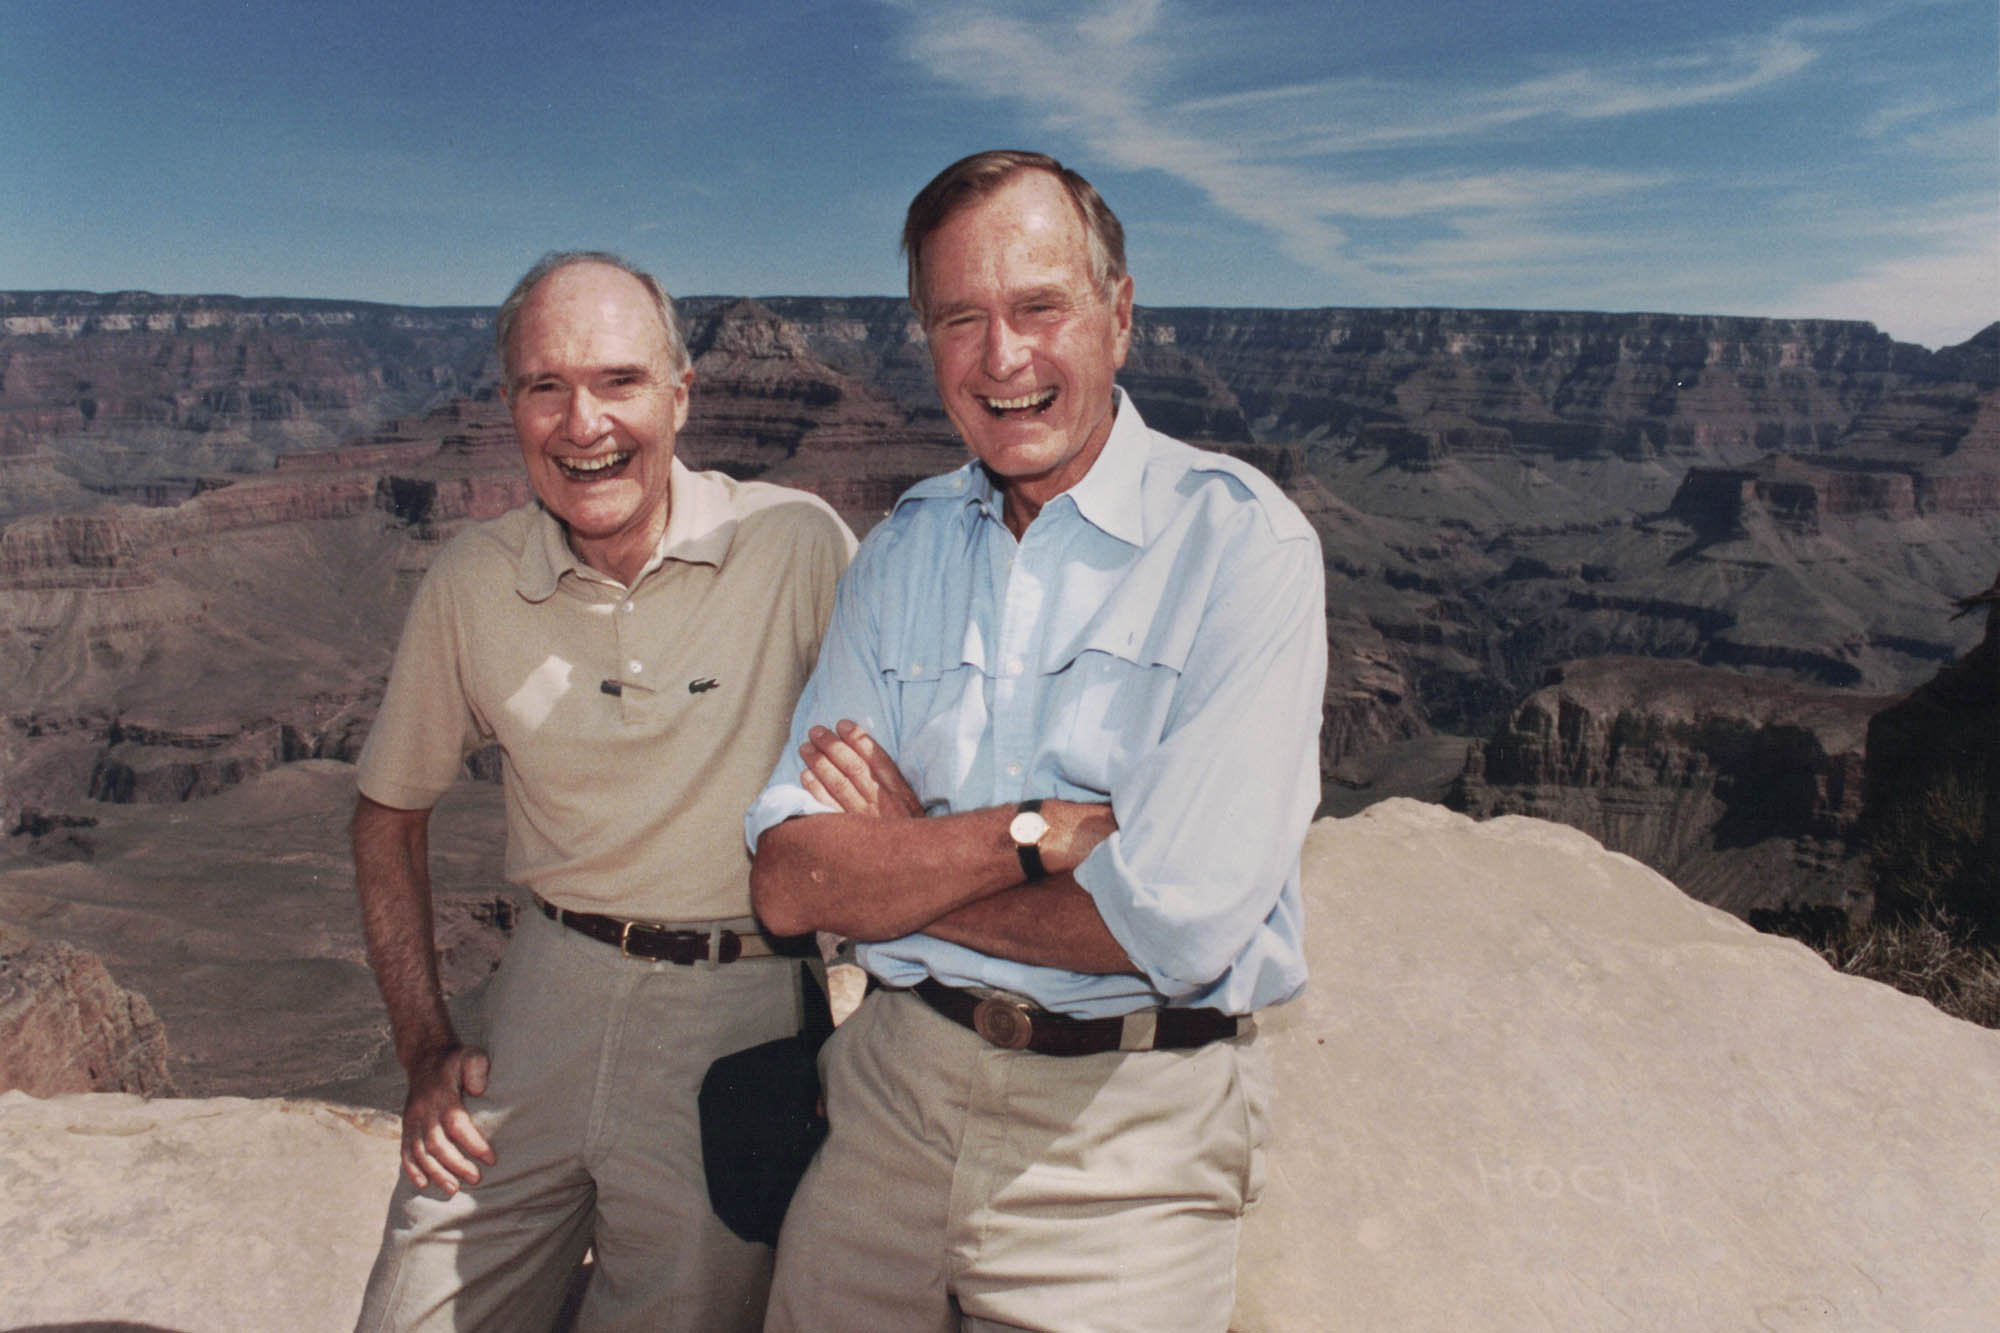 Scowcroft, left, with President Bush, right stand at the Grand Canyon for a picture